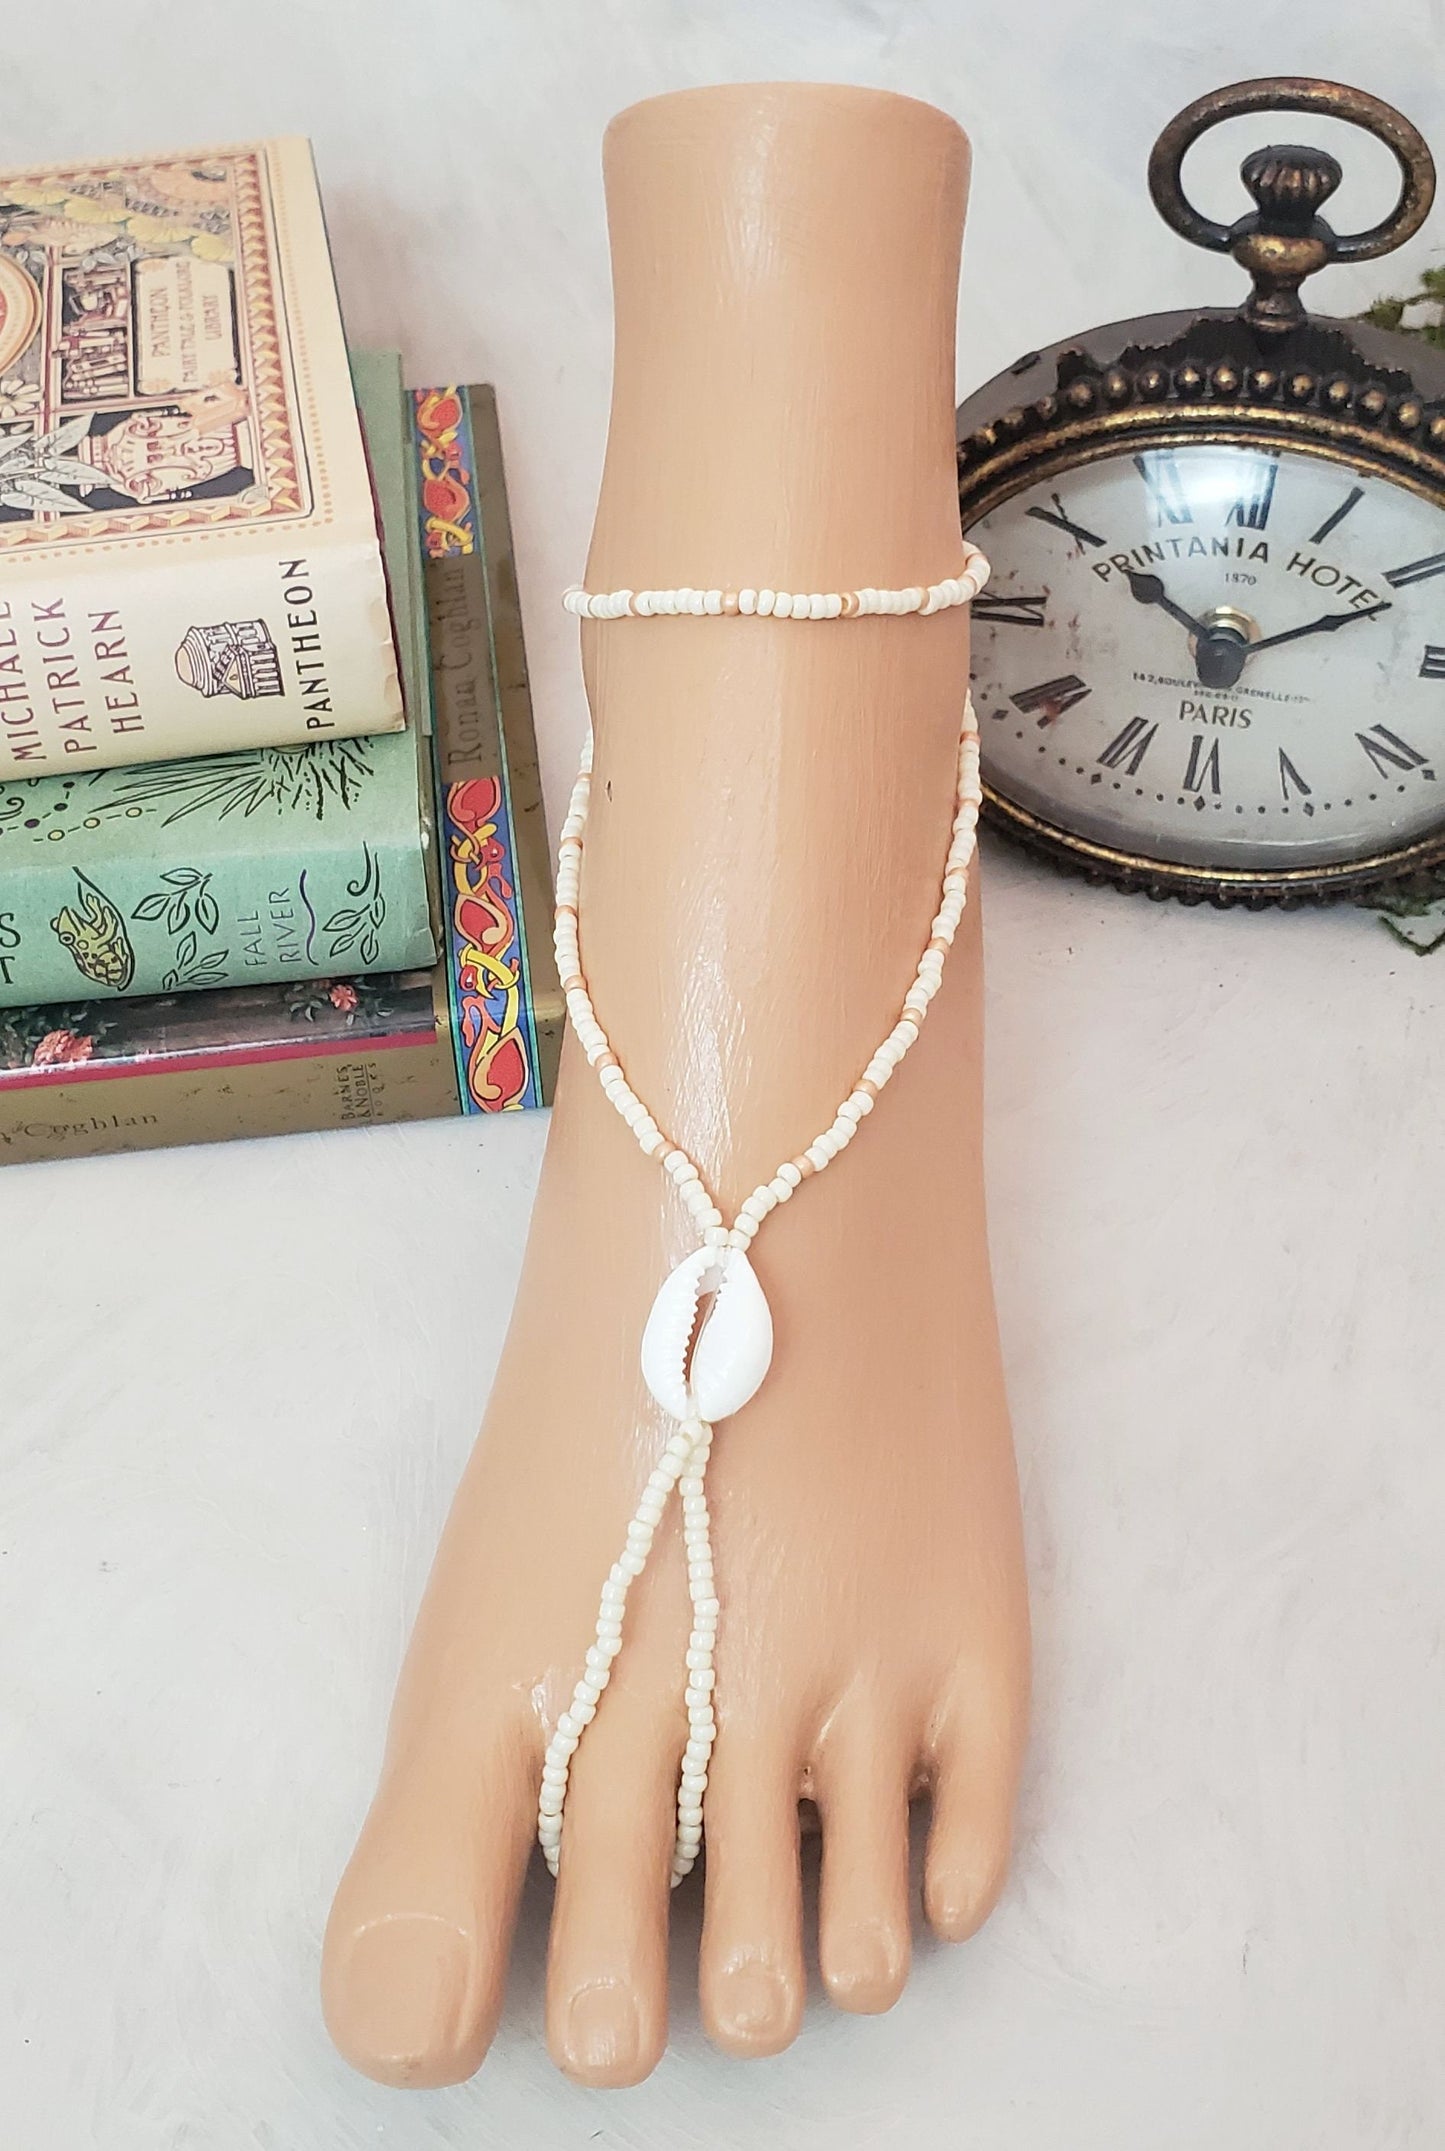 Elastic Beaded Barefoot Sandal or Hand Flower in Opaque White/Ivory + Soft Copper w/Real Shell, Boho, Bohemian, Gypsy, Wedding, Bridesmaid